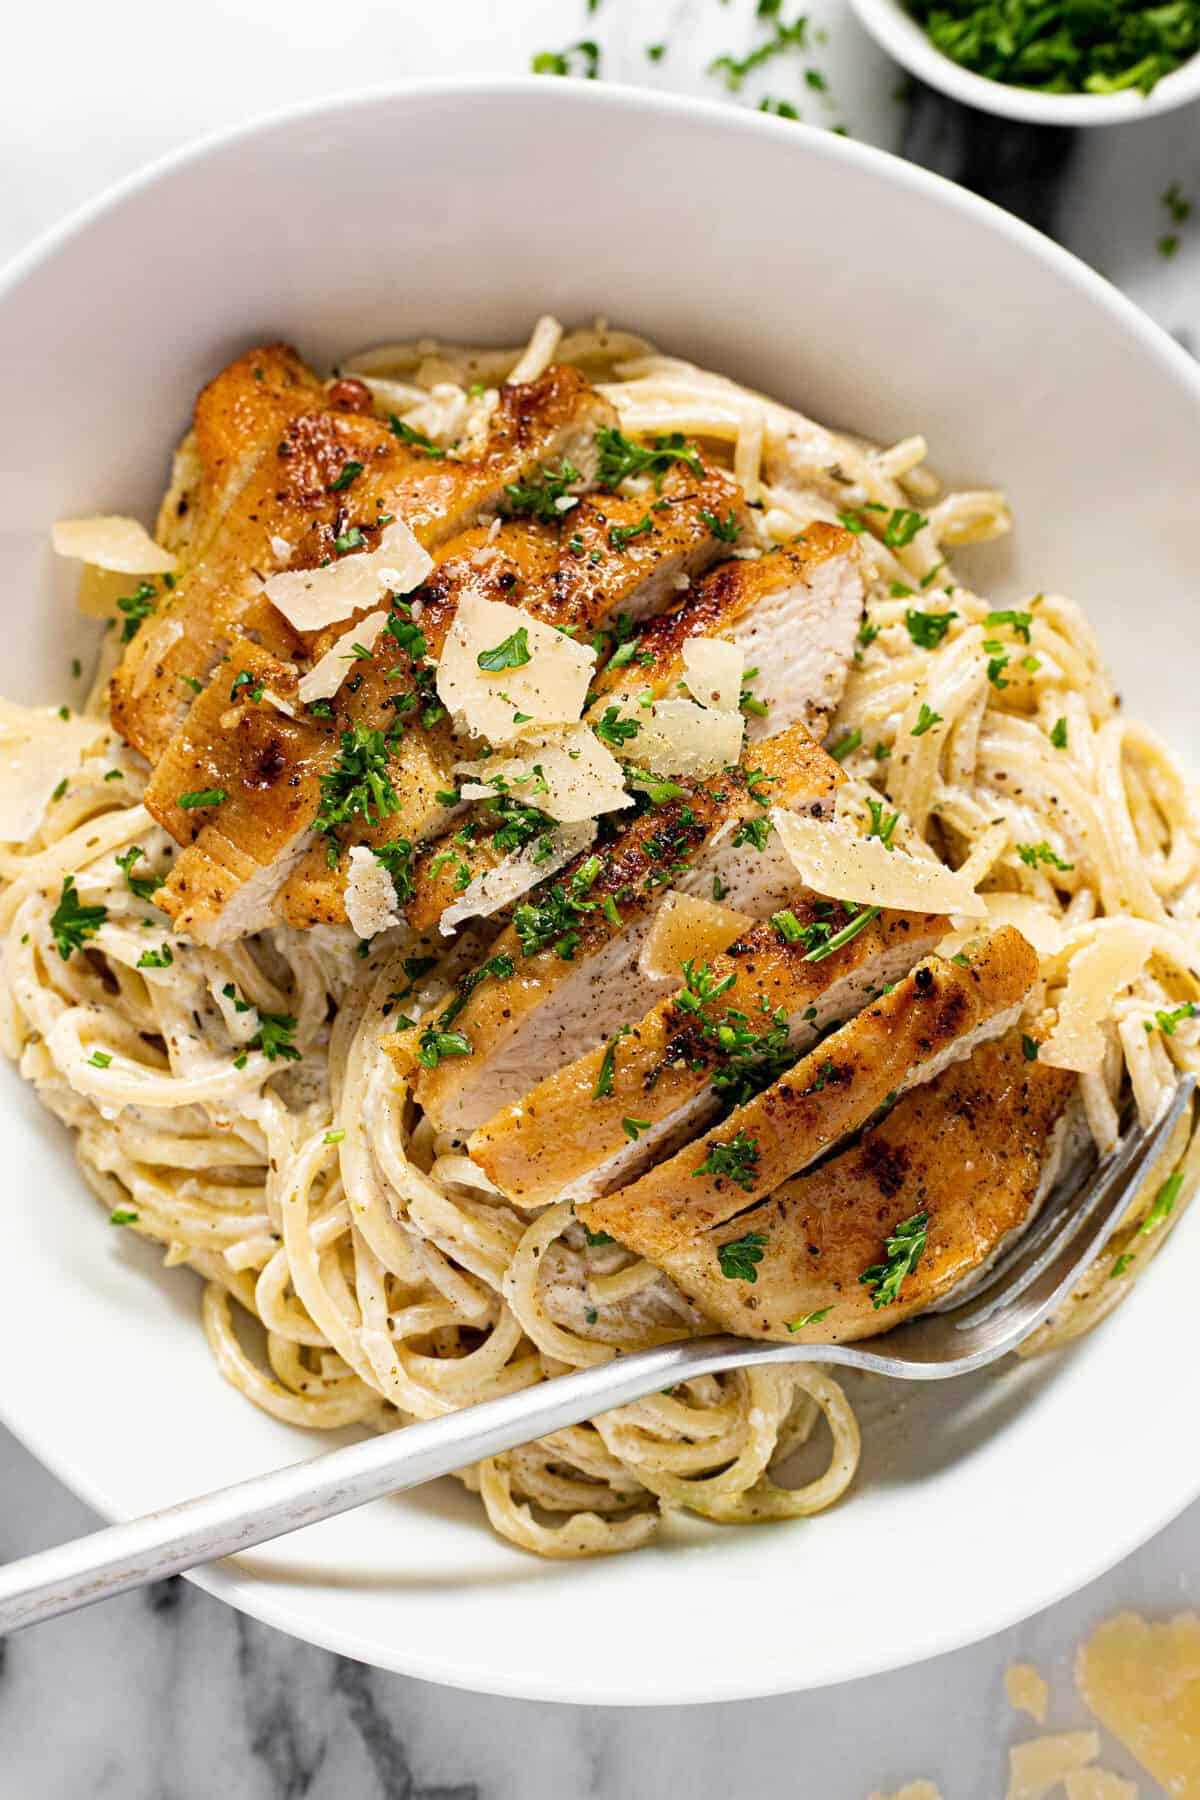 Large white bowl filled with creamy spaghetti and sliced lemon chicken garnished with parsley.